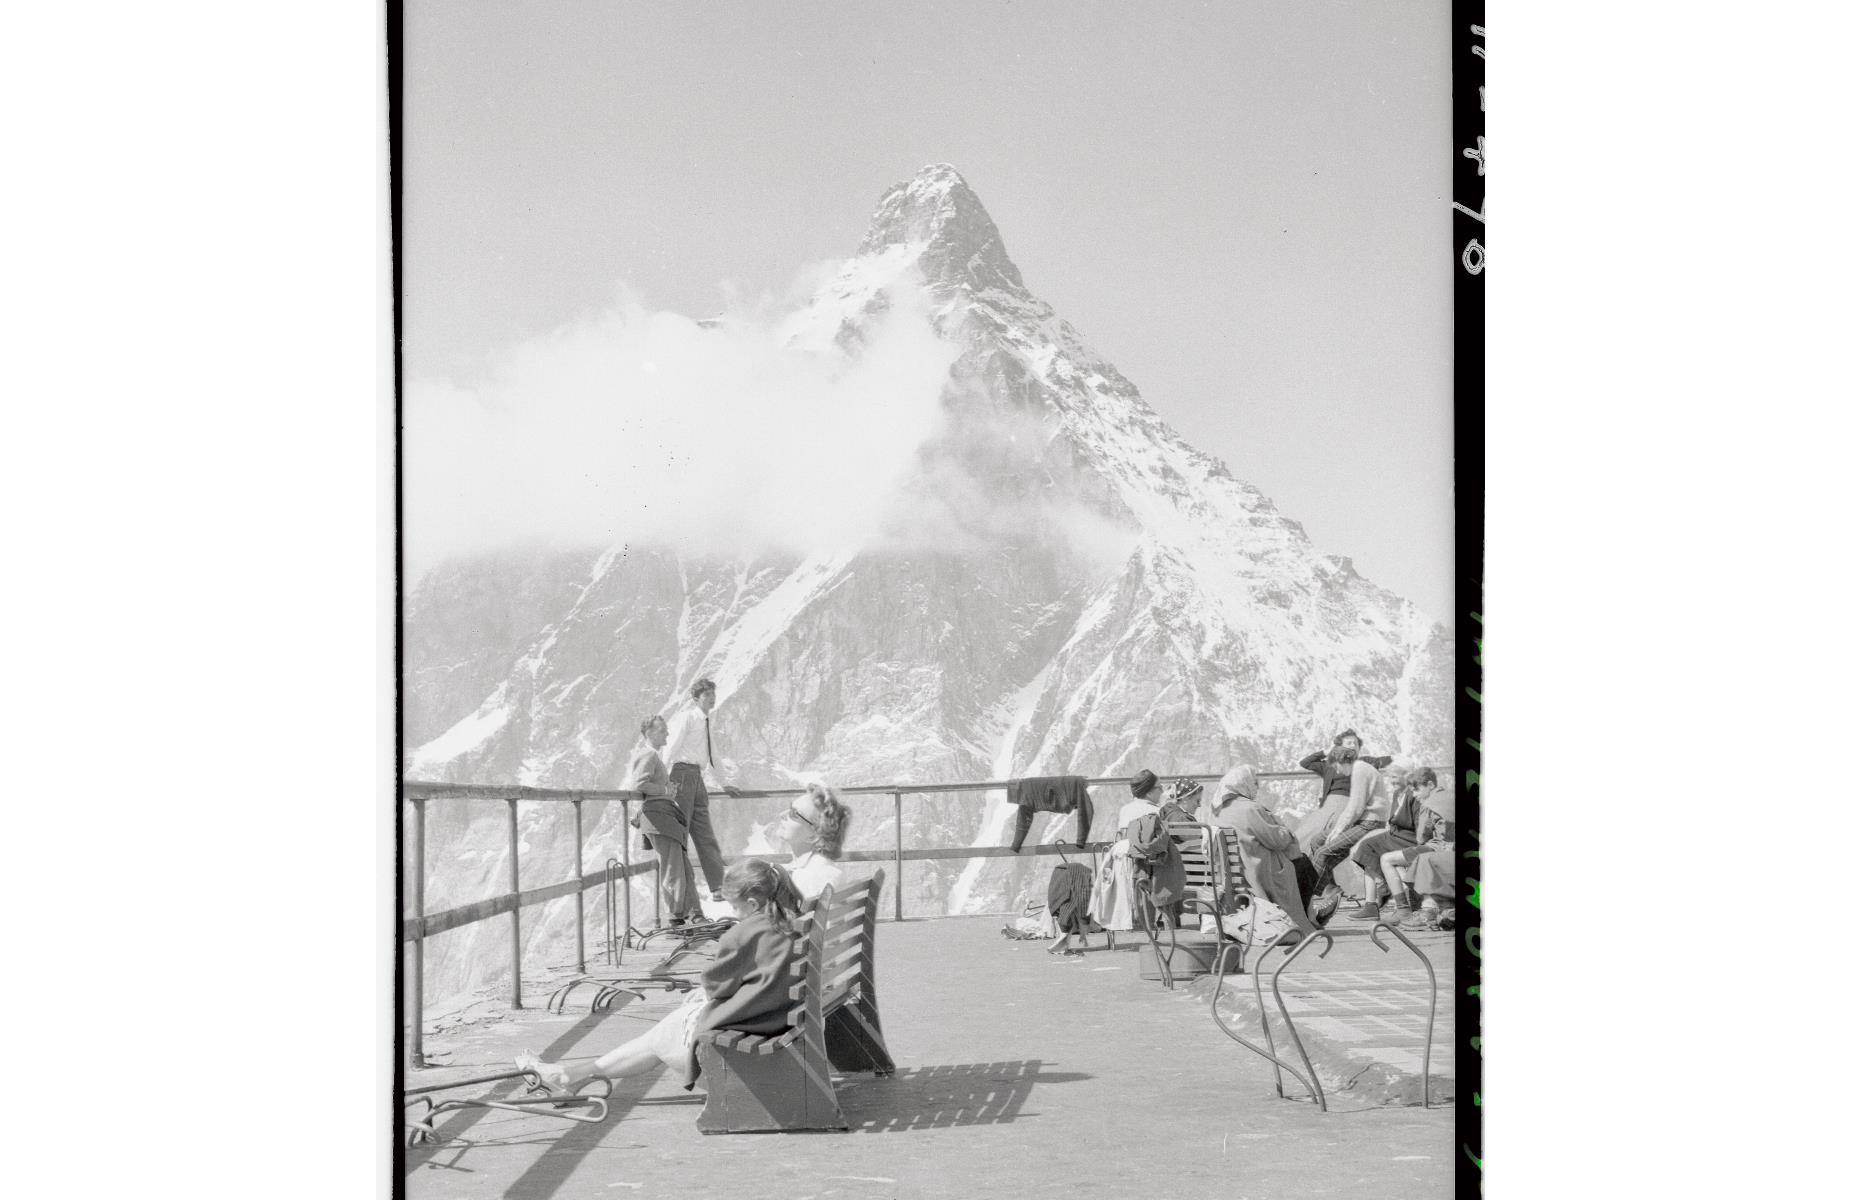 <p>This horn-shaped mountain in the Swiss Alps, six miles (10km) southwest of Zermatt, gained global recognition when its summit was first conquered by British explorer Edward Whymper on 14 July 1865. Tragically however, four of his party fell to their deaths on the way down. In 1971, Whymper published a book about his experience climbing the mountain, <em>Scrambles Among the Alps</em>, which became a global bestseller and sent tourists flocking to the Matterhorn. Pictured here are holidaymakers on a viewpoint on the Italian side of the mountain in the 1950s.</p>